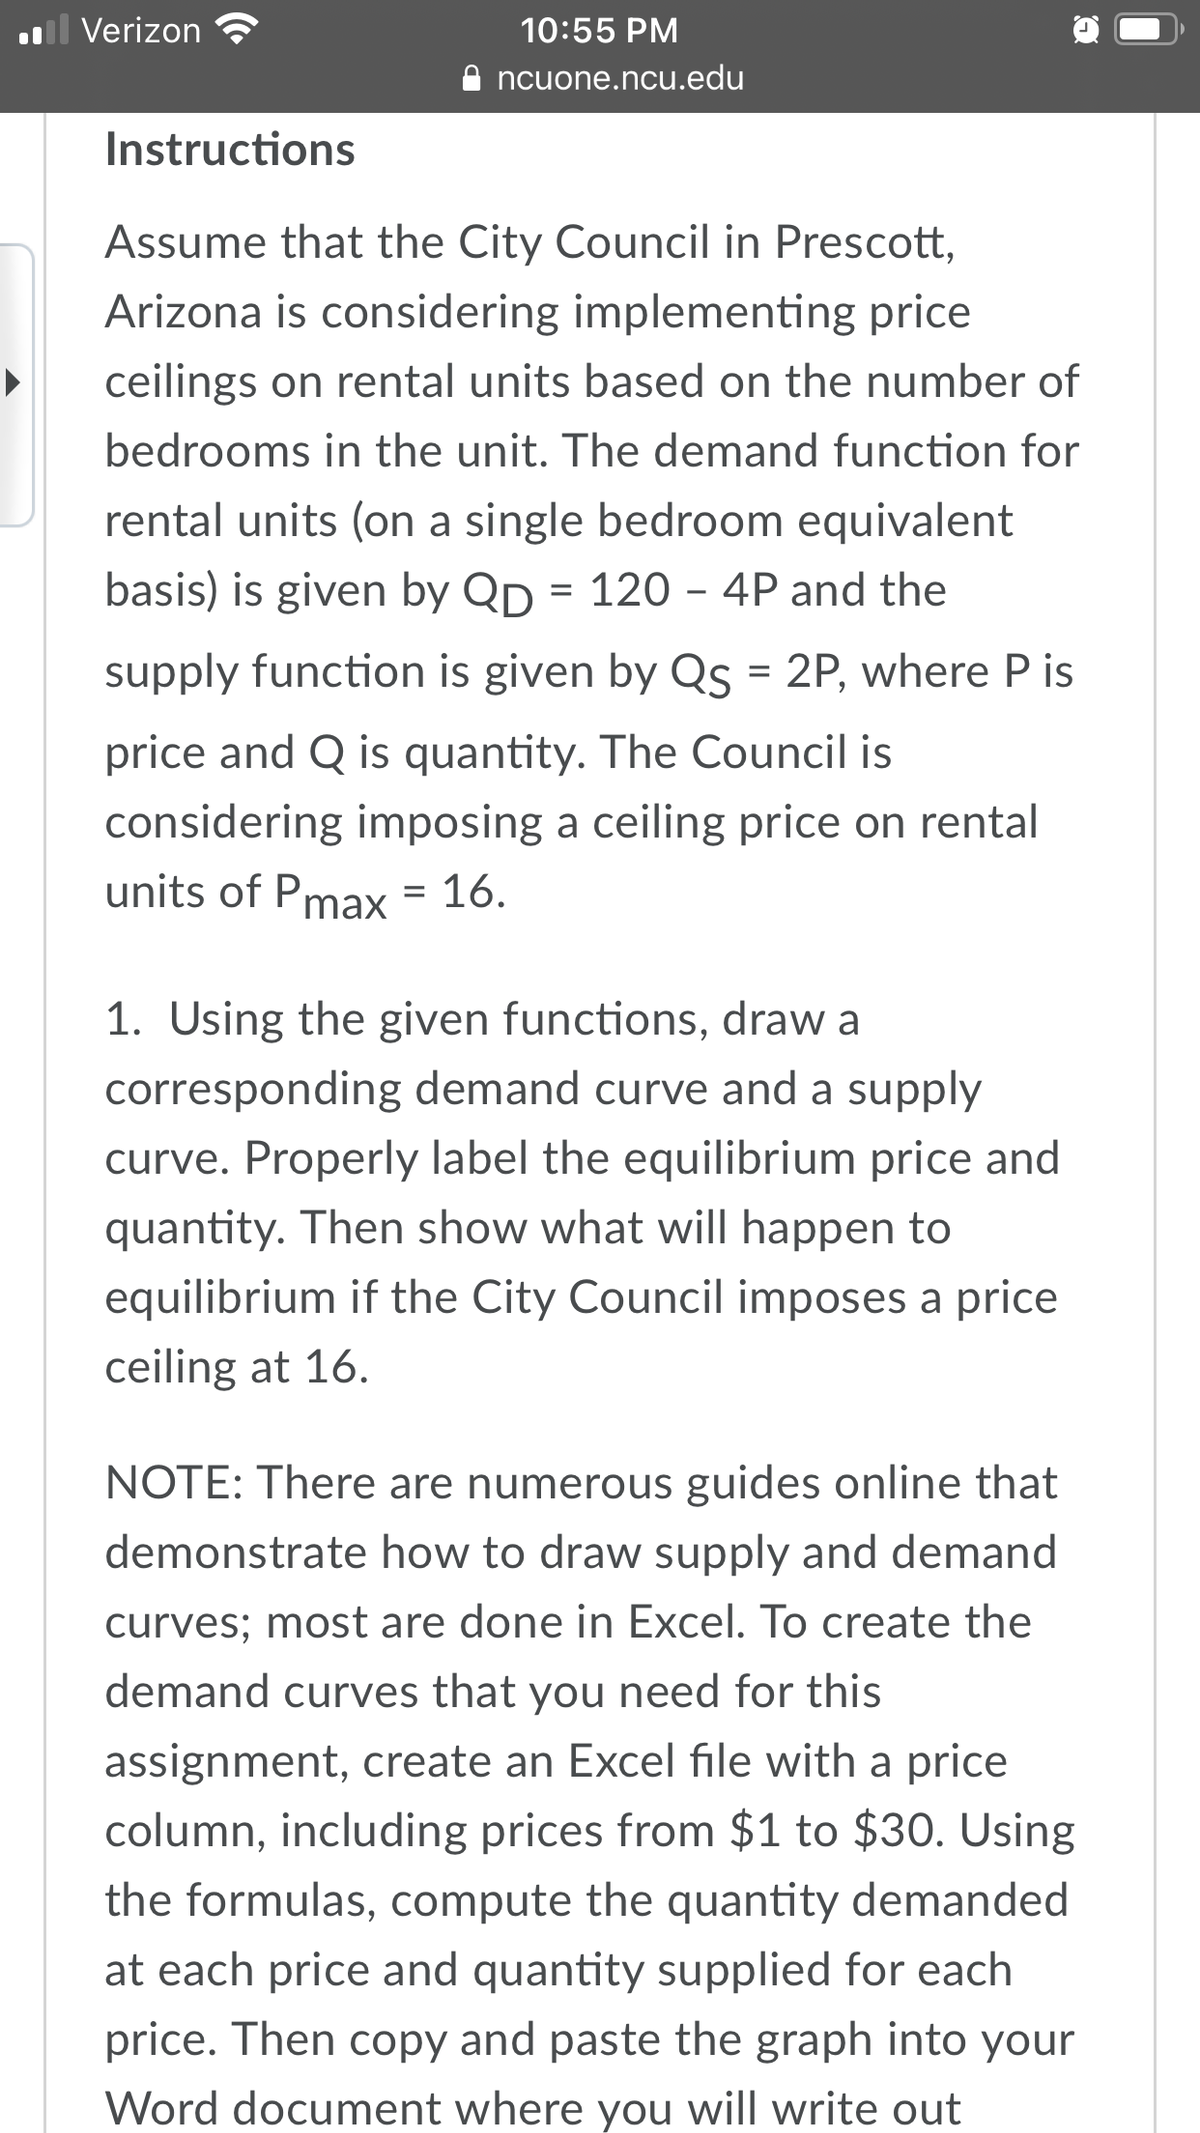 l Verizon
10:55 PM
ncuone.ncu.edu
Instructions
Assume that the City Council in Prescott,
Arizona is considering implementing price
ceilings on rental units based on the number of
bedrooms in the unit. The demand function for
rental units (on a single bedroom equivalent
basis) is given by Qp = 120 – 4P and the
supply function is given by Qs = 2P, where P is
price and Q is quantity. The Council is
considering imposing a ceiling price on rental
units of Pmax = 16.
1. Using the given functions, draw a
corresponding demand curve and a supply
curve. Properly label the equilibrium price and
quantity. Then show what will happen to
equilibrium if the City Council imposes a price
ceiling at 16.
NOTE: There are numerous guides online that
demonstrate how to draw supply and demand
curves; most are done in Excel. To create the
demand curves that you need for this
assignment, create an Excel file with a price
column, including prices from $1 to $30. Using
the formulas, compute the quantity demanded
at each price and quantity supplied for each
price. Then copy and paste the graph into your
Word document where you will write out
